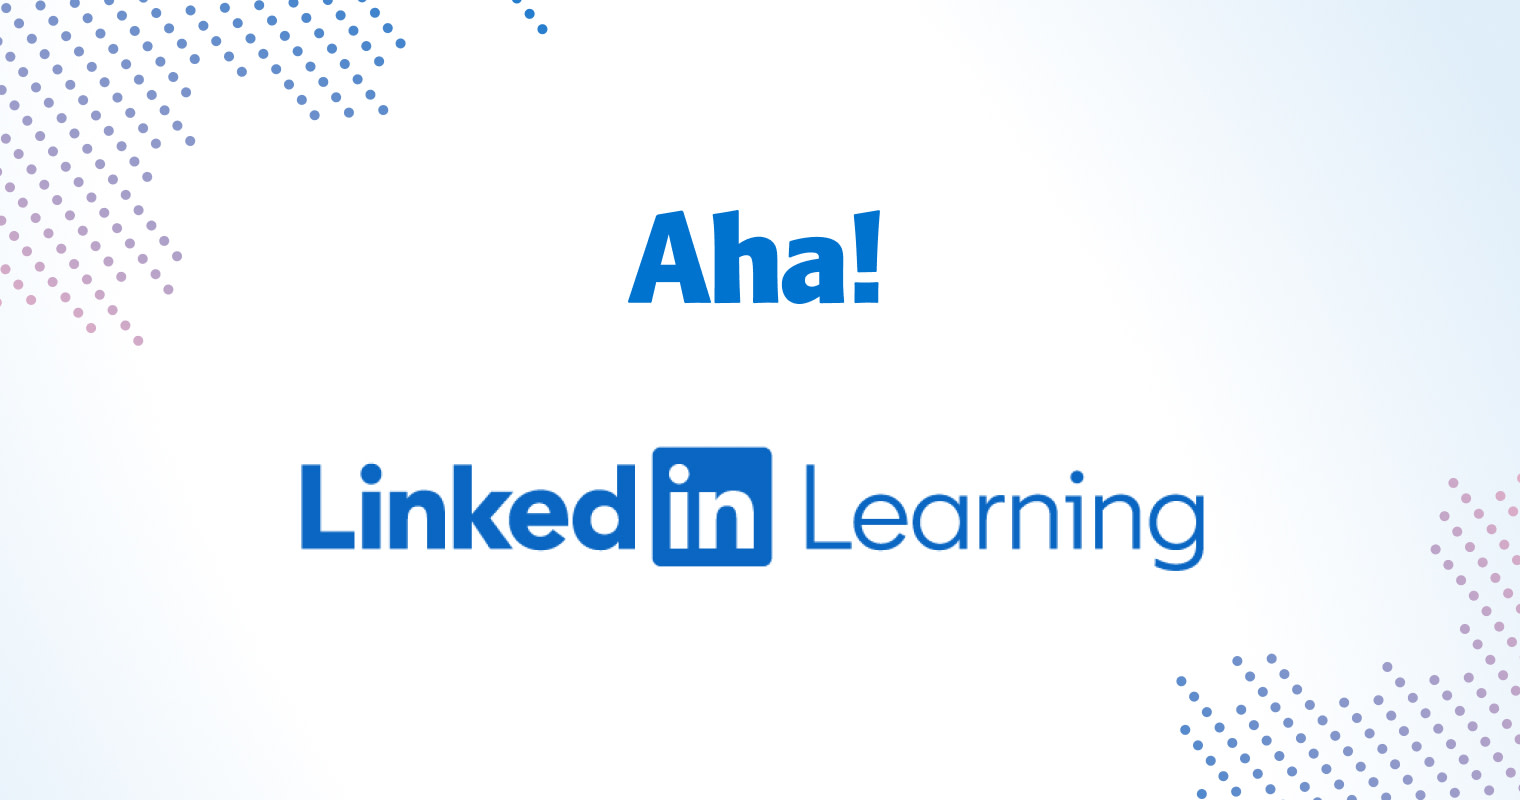 Aha! and LinkedIn Learning Partner on a Professional Certificate to Expand Access to Product Management Training